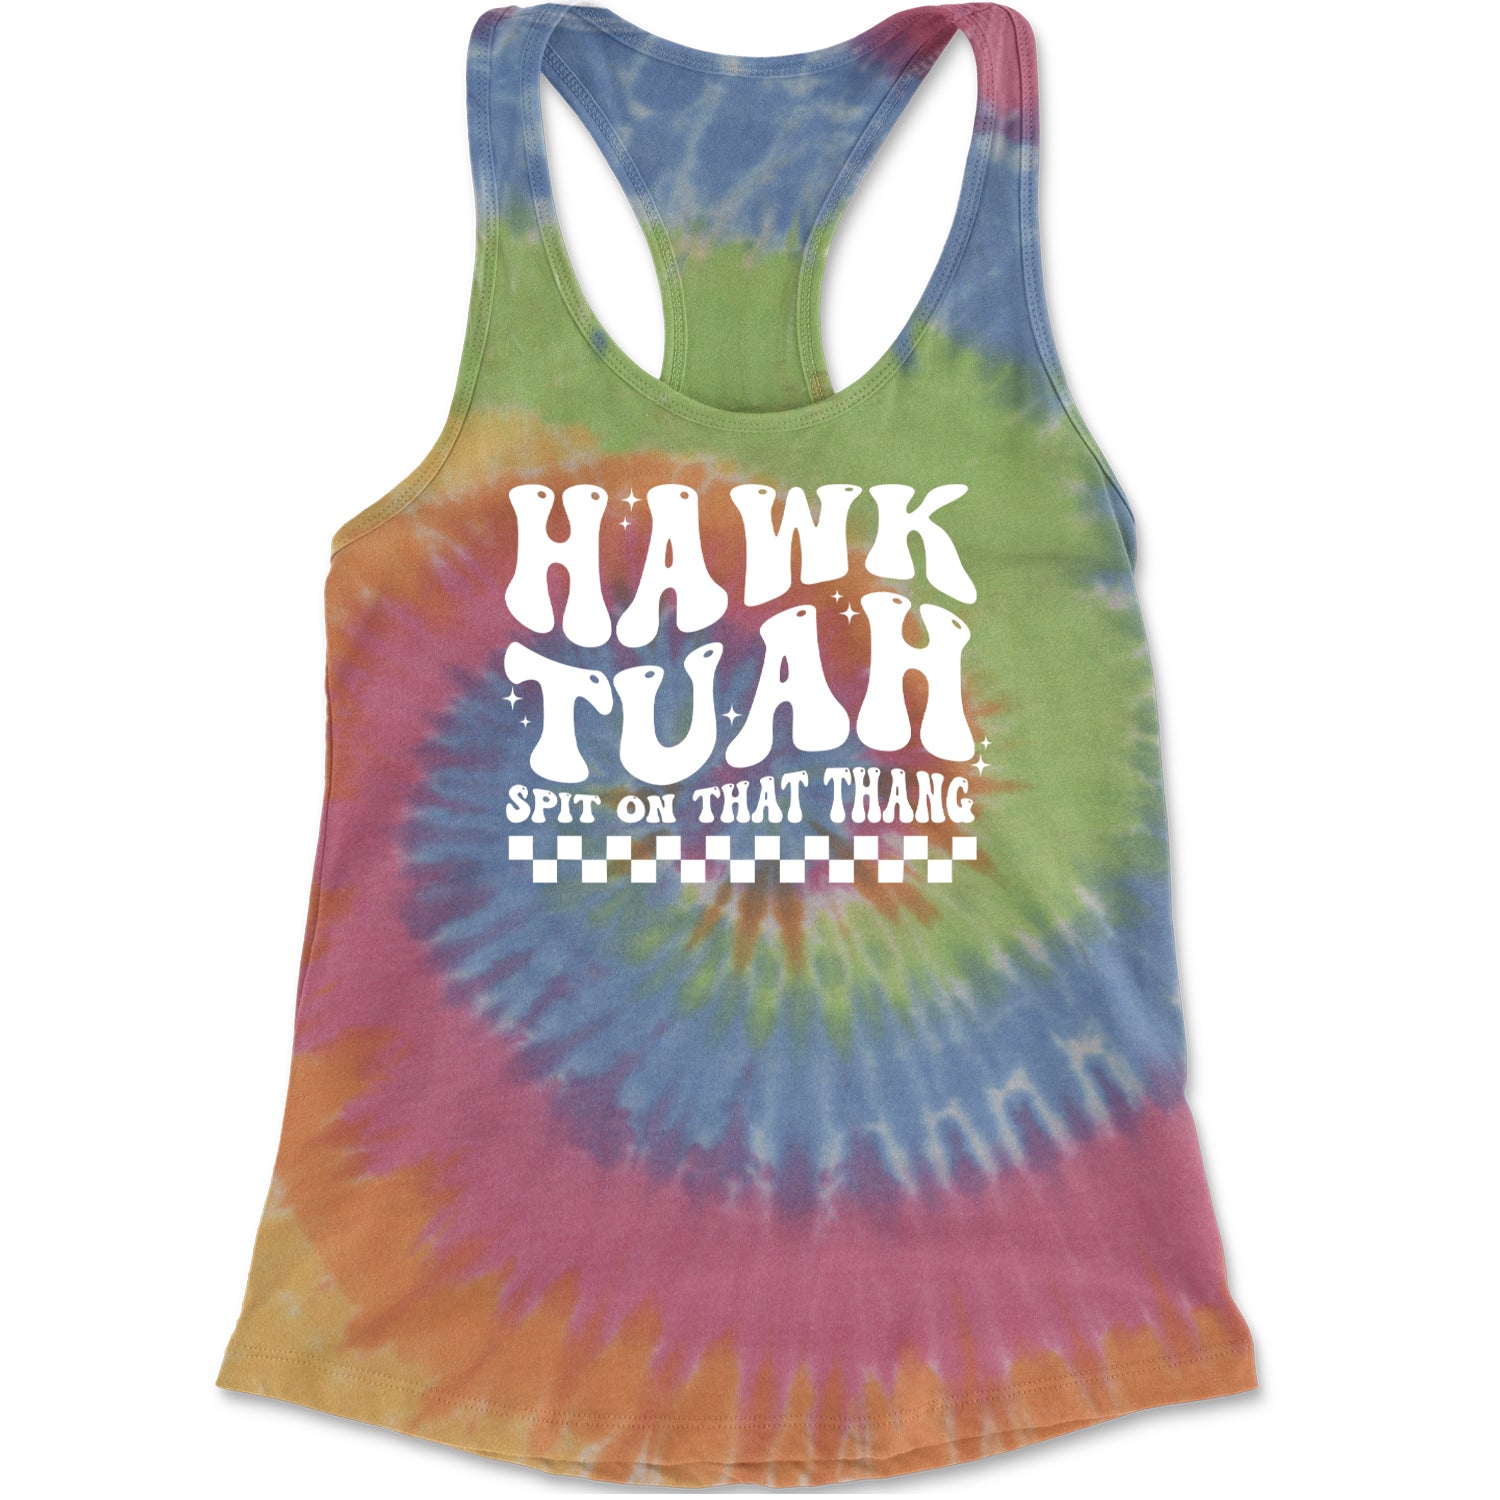 Hawk Tuah Spit On That Thang Racerback Tank Top for Women Eternity